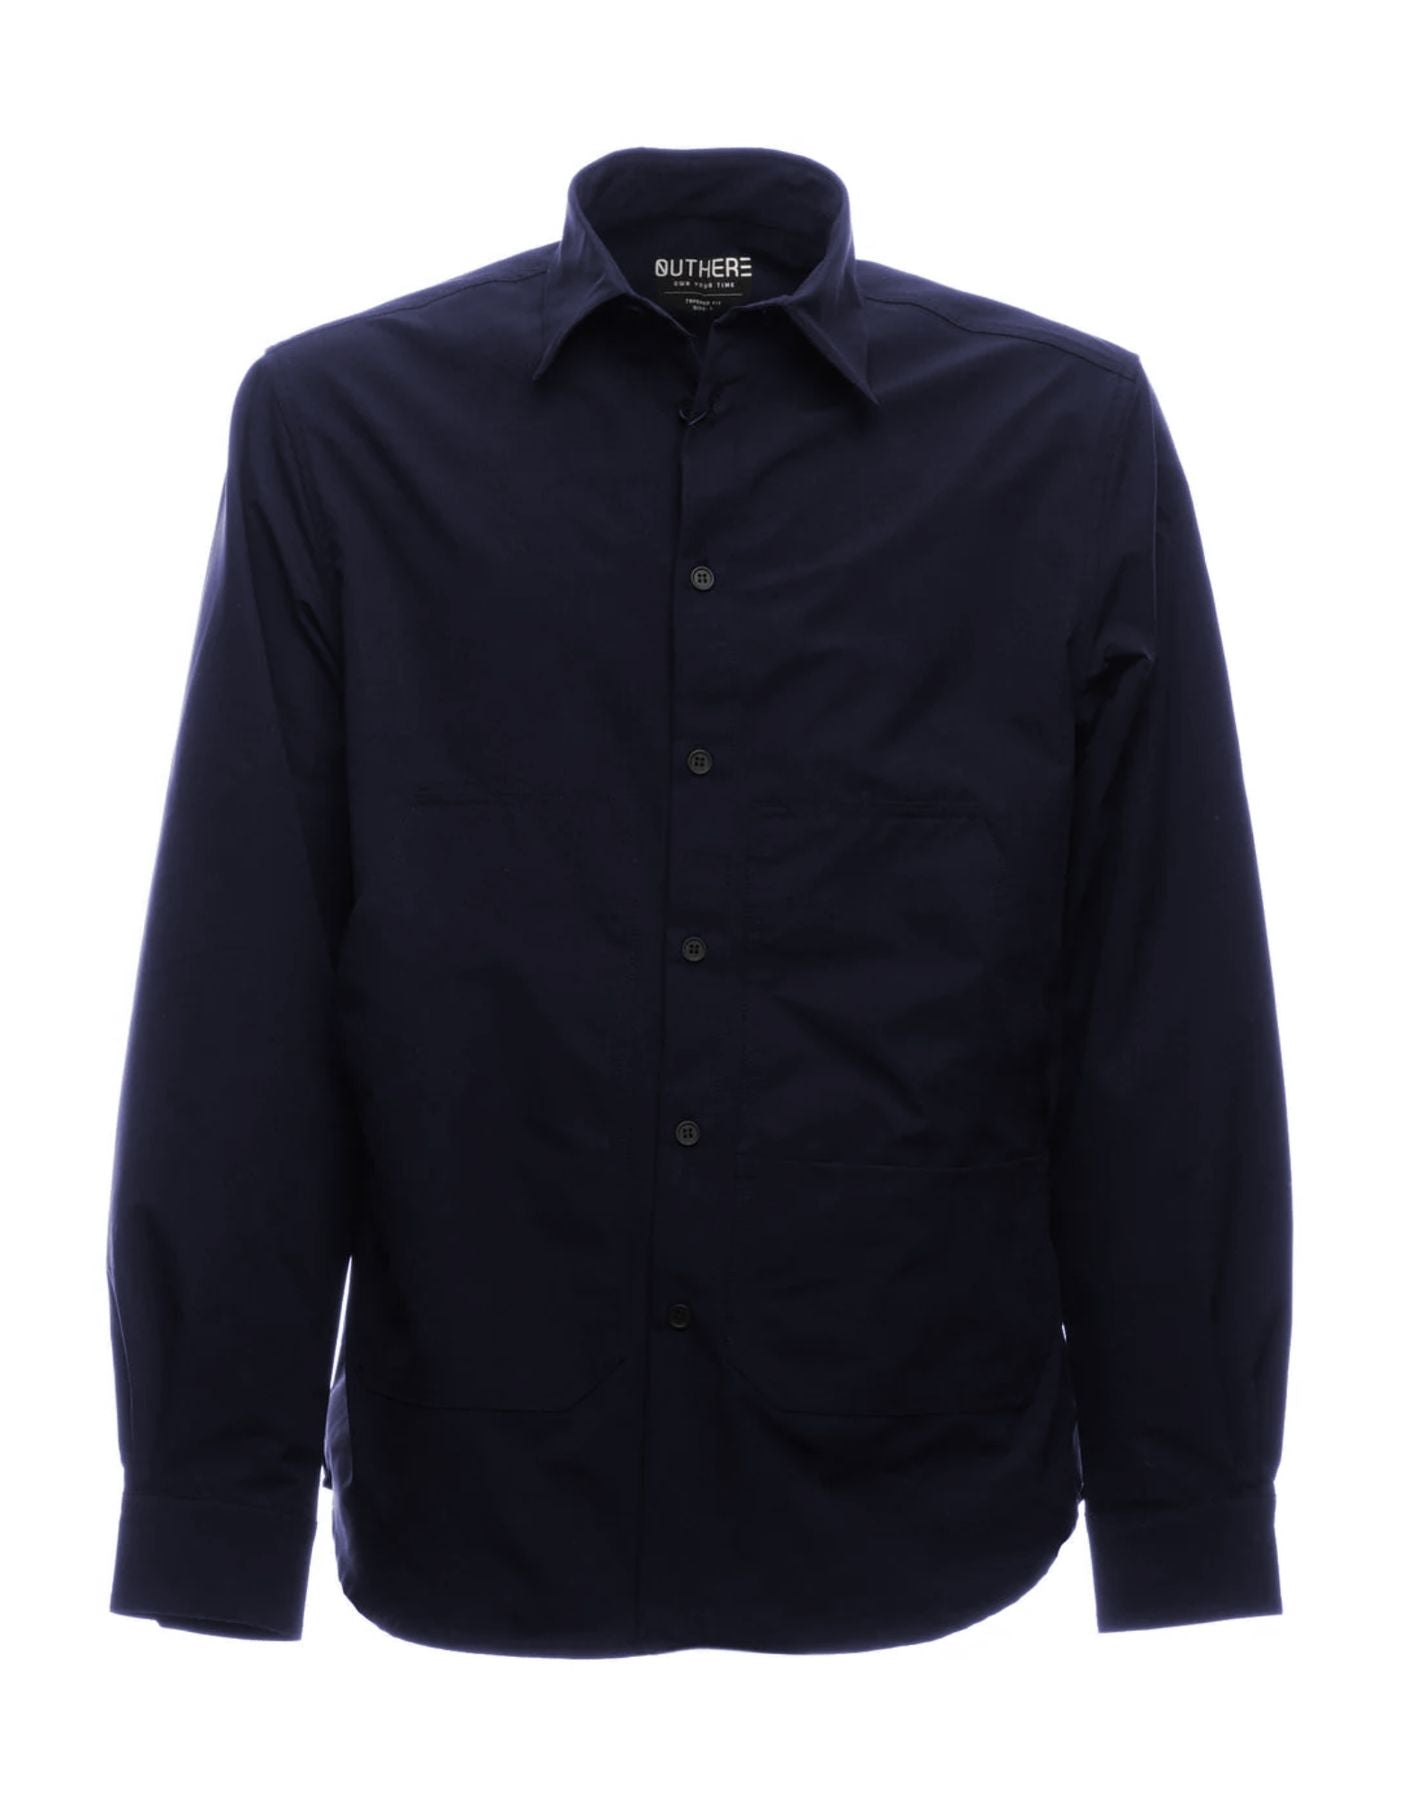 Shirt man EOTM142AG42 NAVY OUTHERE